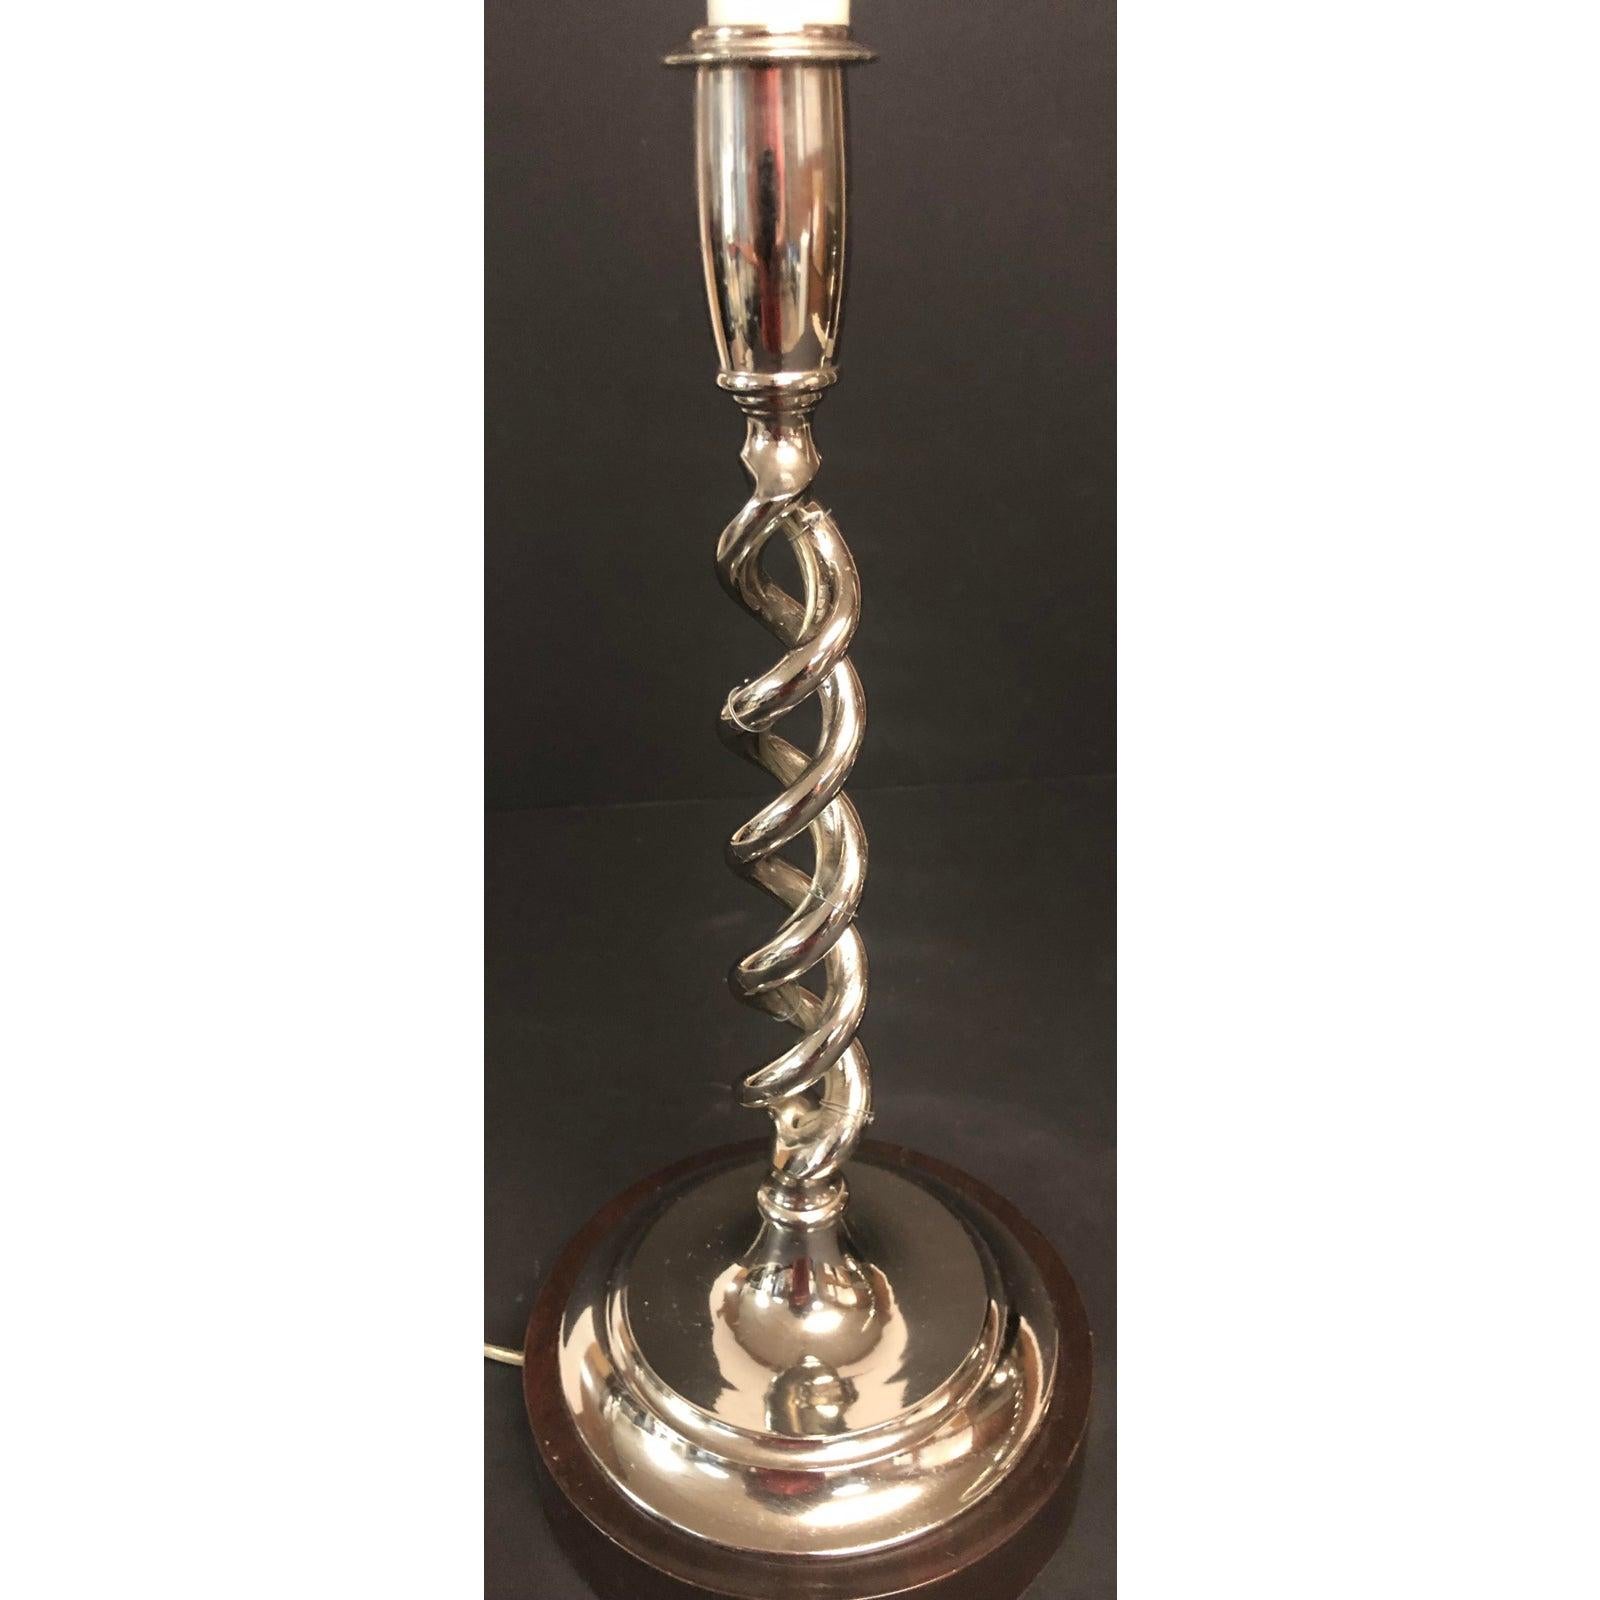 Cast Pair of Open Barley Twist Candlestick Lamps